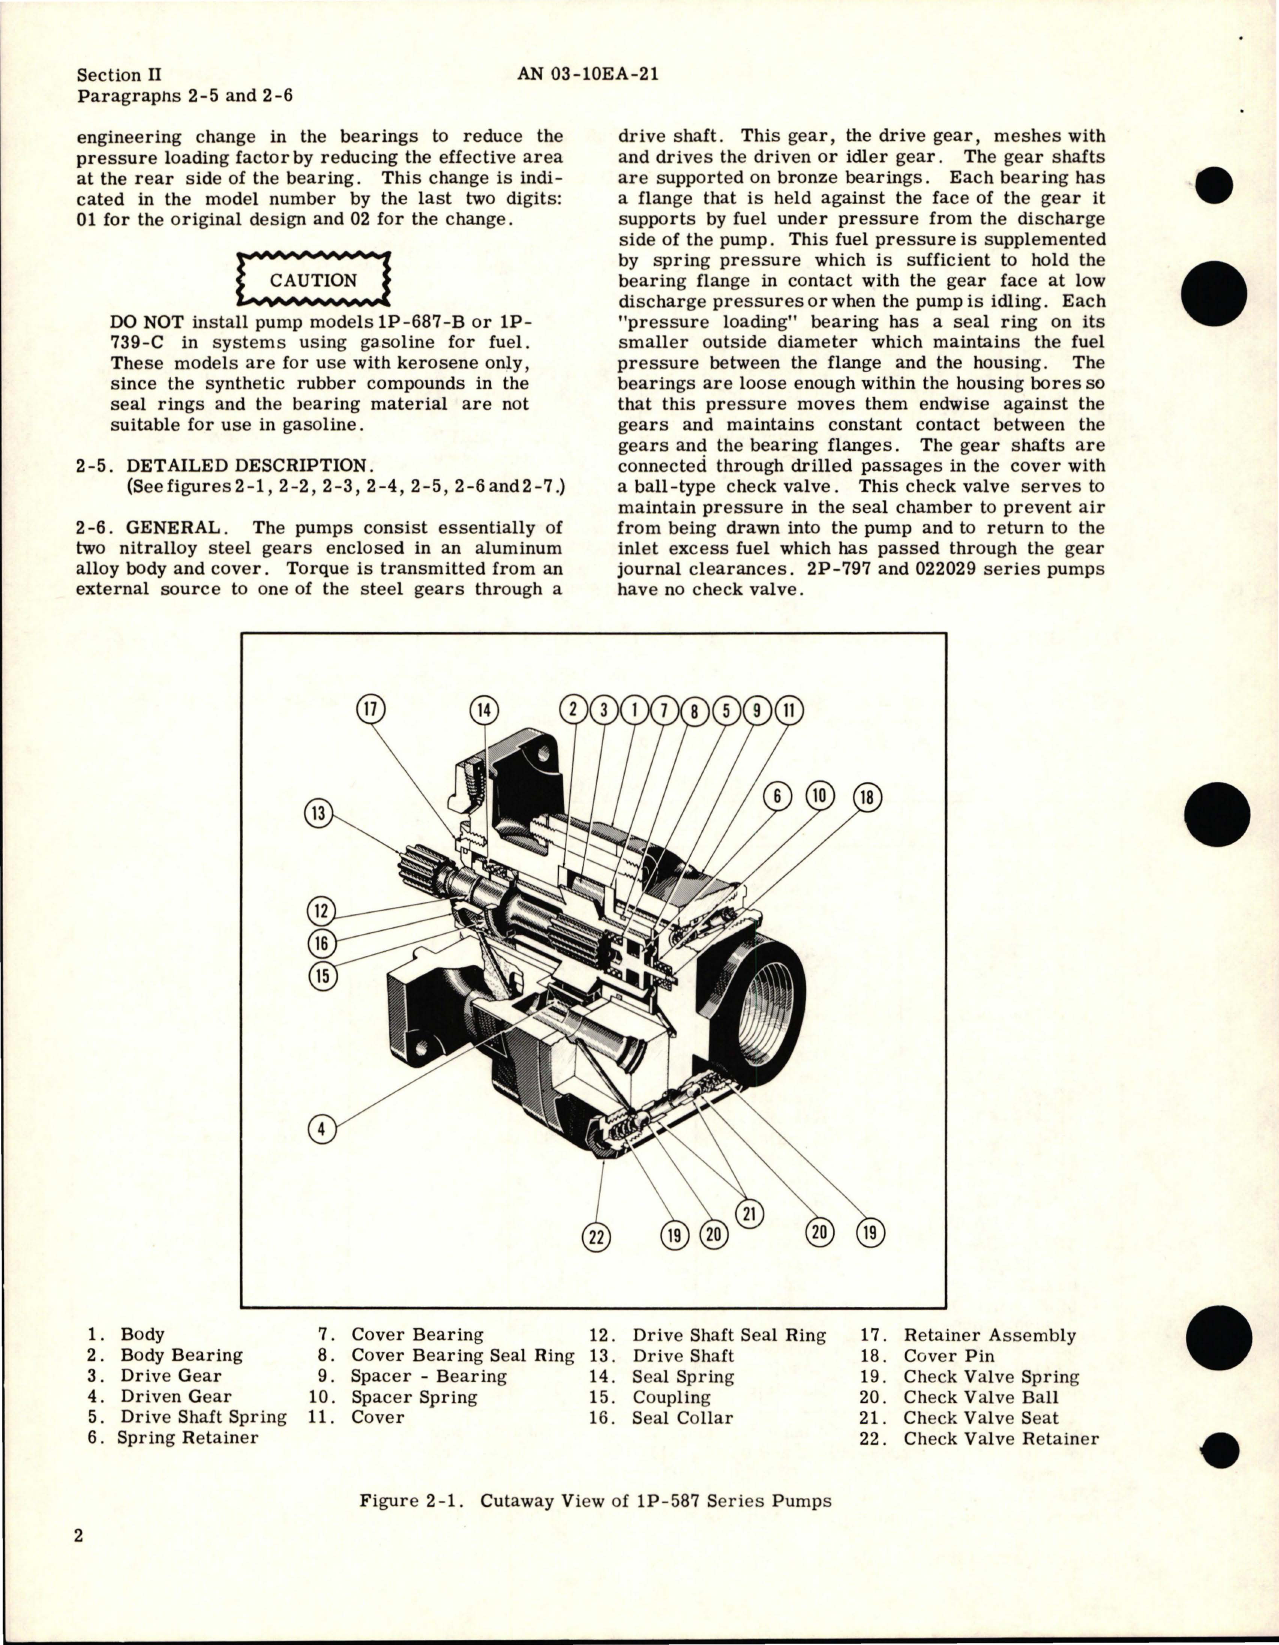 Sample page 8 from AirCorps Library document: Operation, Service and Overhaul Instructions with Parts for Engine Driven Gear Type High Pressure Fuel Pumps